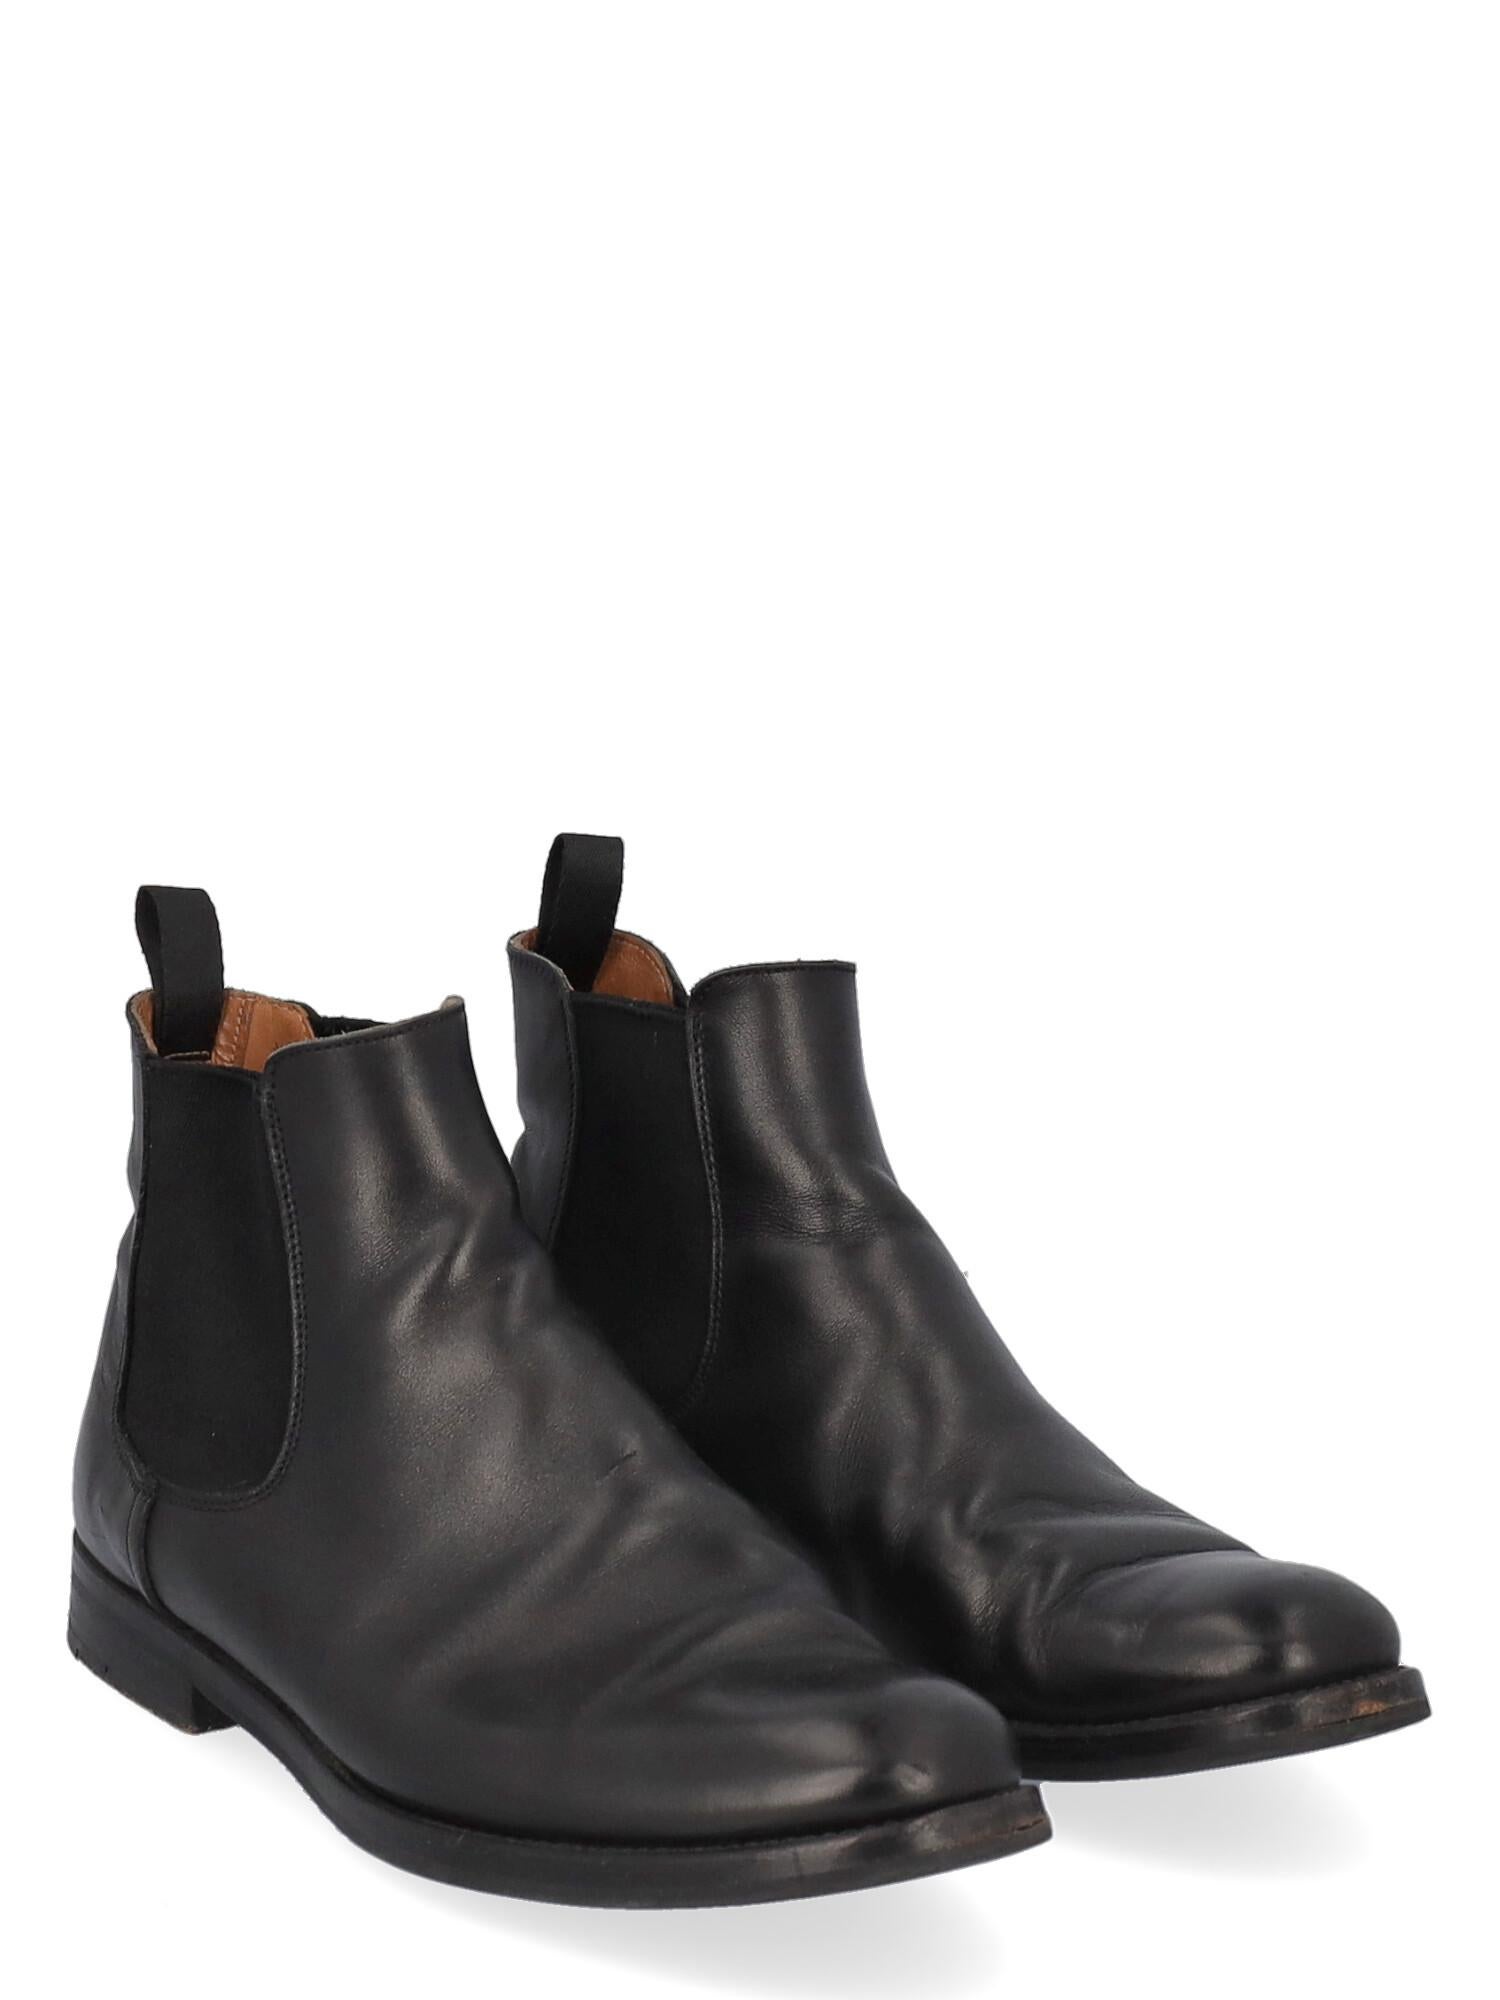 Product Description: Ankle boots, leather, solid color, round toe, branded insole, branded sole

Includes:  N/A

Product Condition: Good
Sole: visible signs of use. Upper: slightly visible deformation, visible wrinkling. Insole: negligible